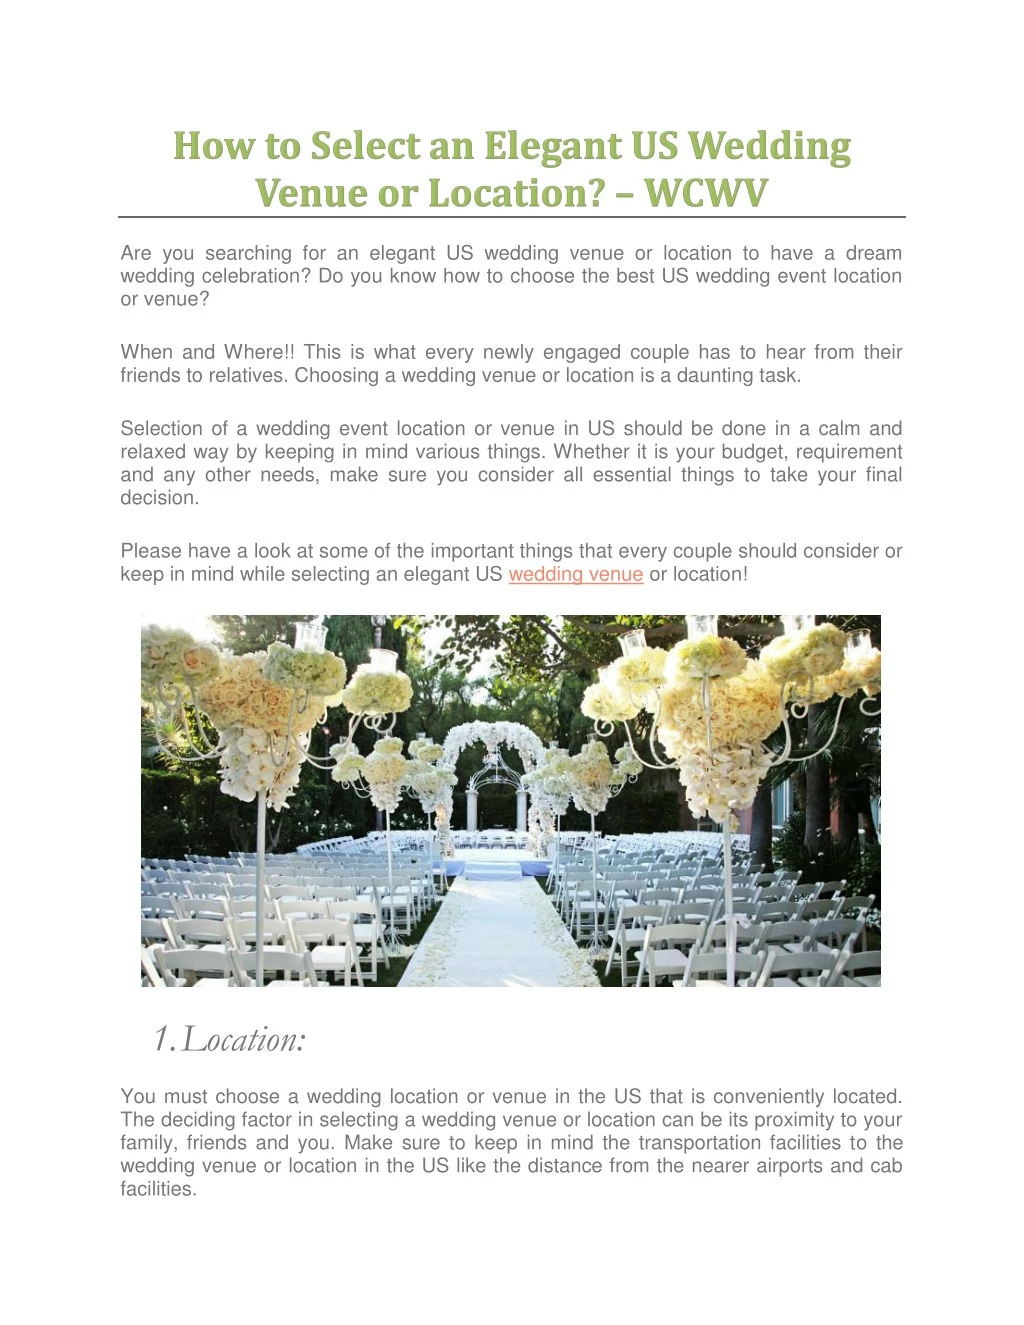 are you searching for an elegant us wedding venue